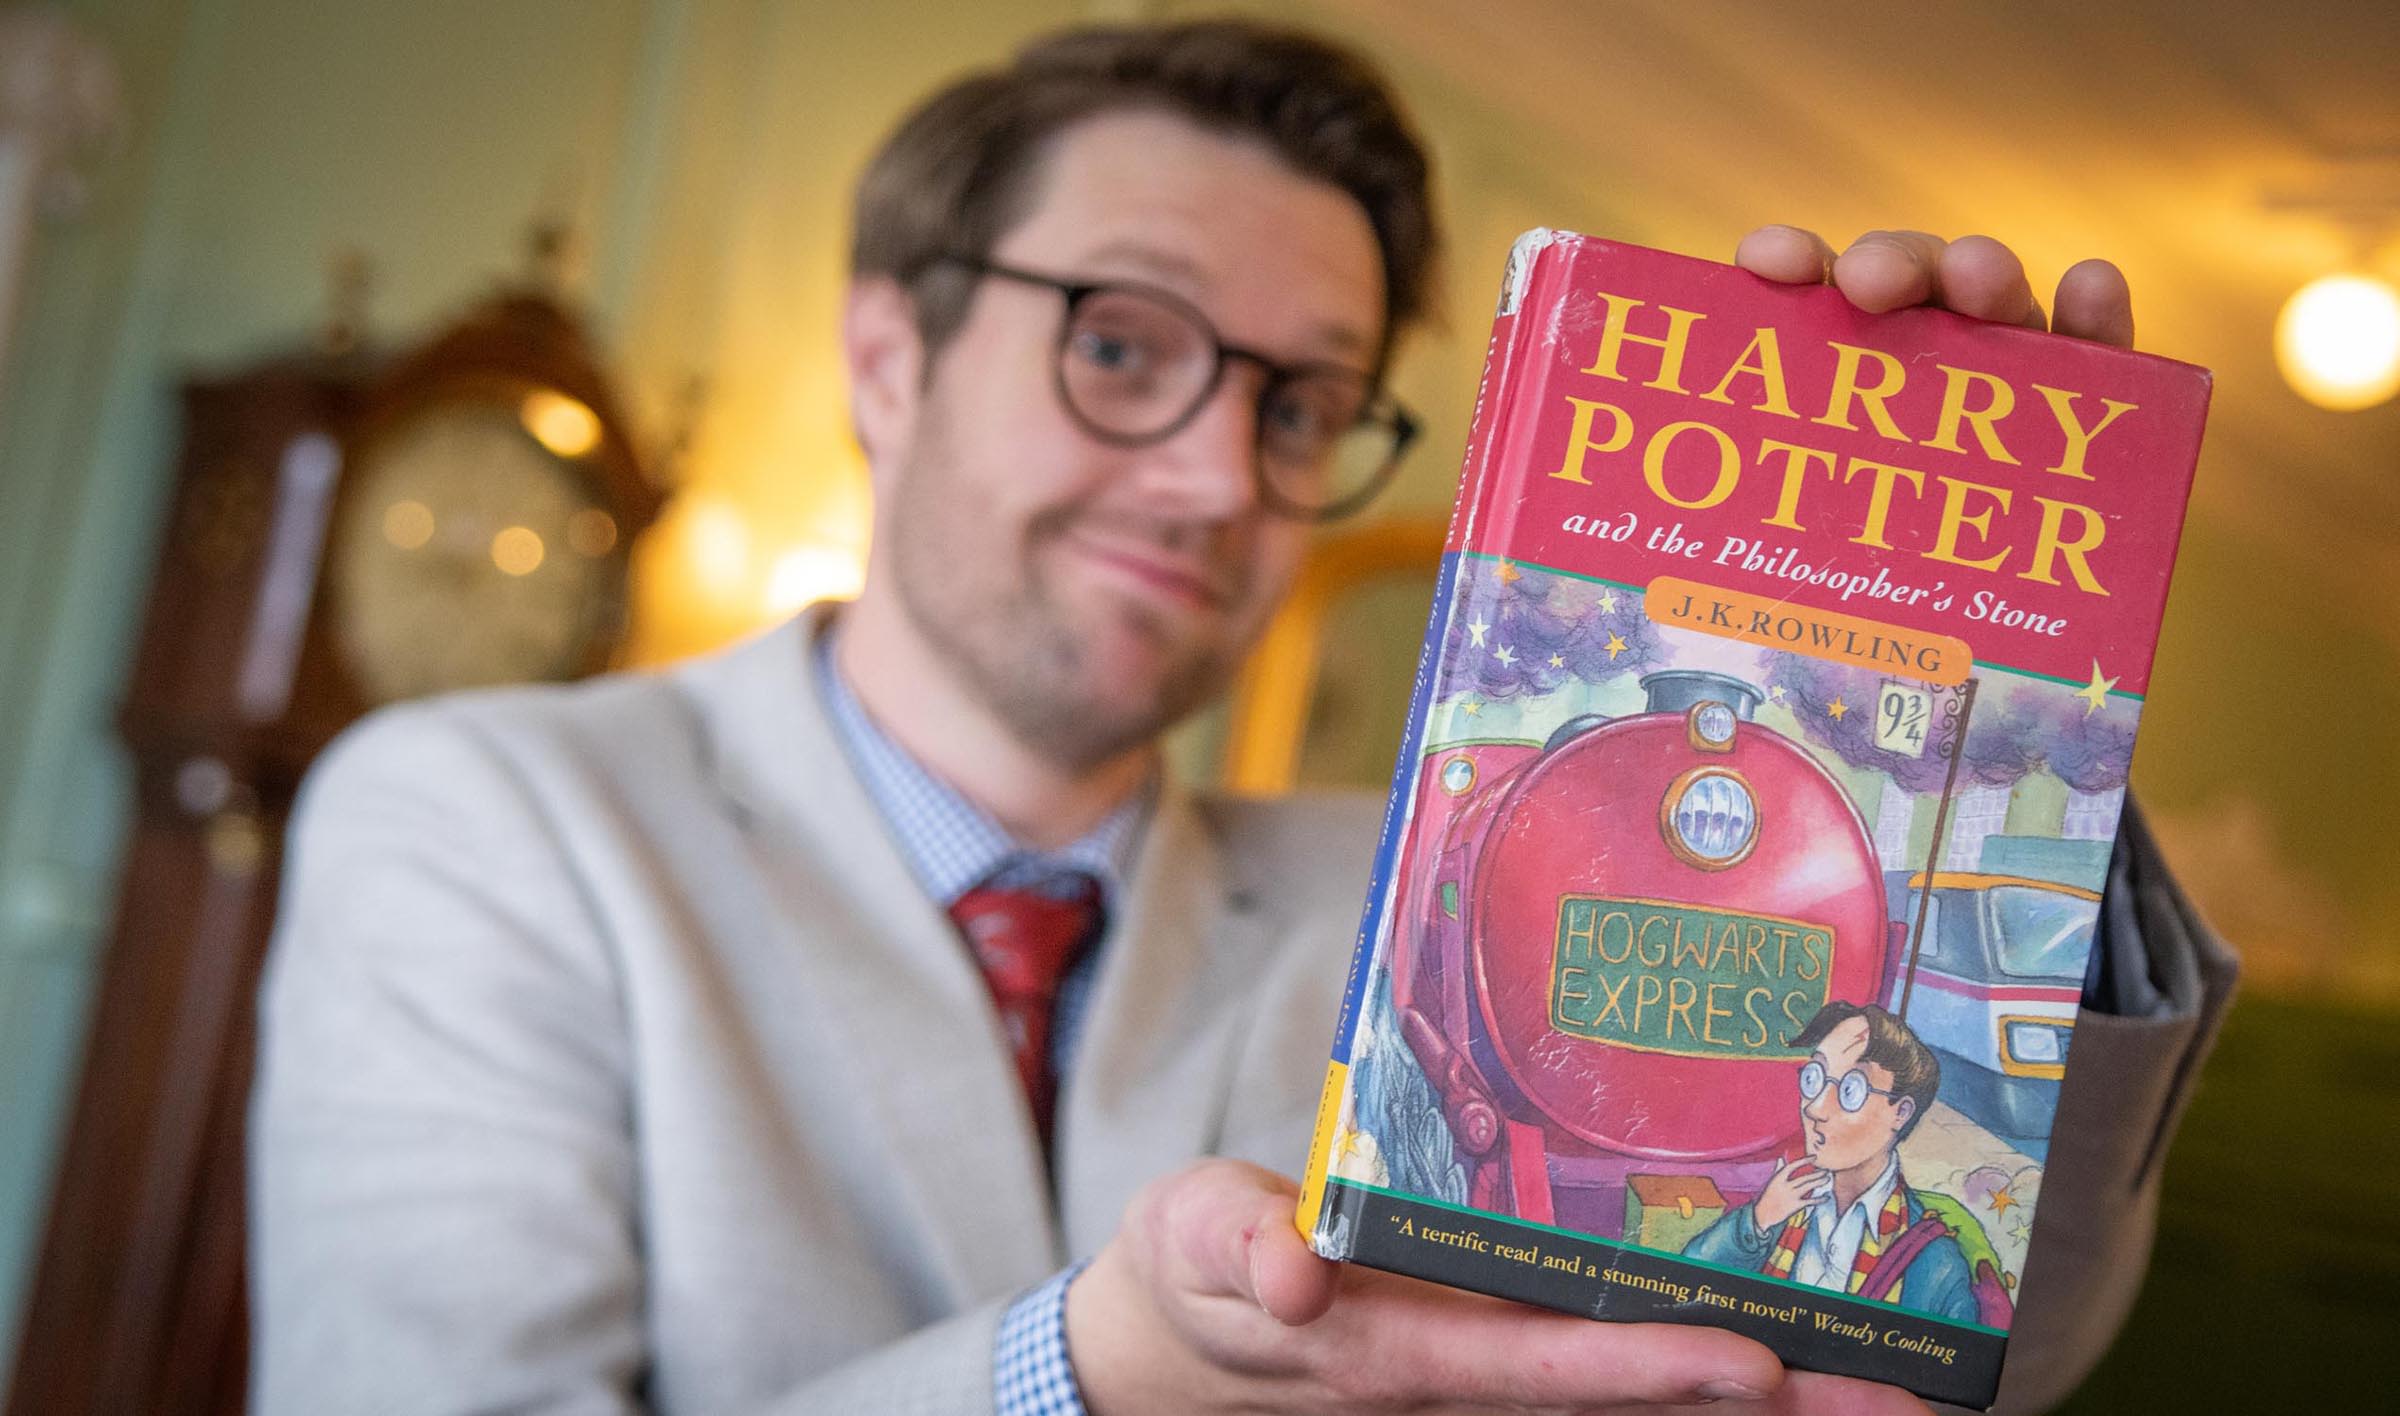 A rare first edition Harry Potter book with two typos just sold